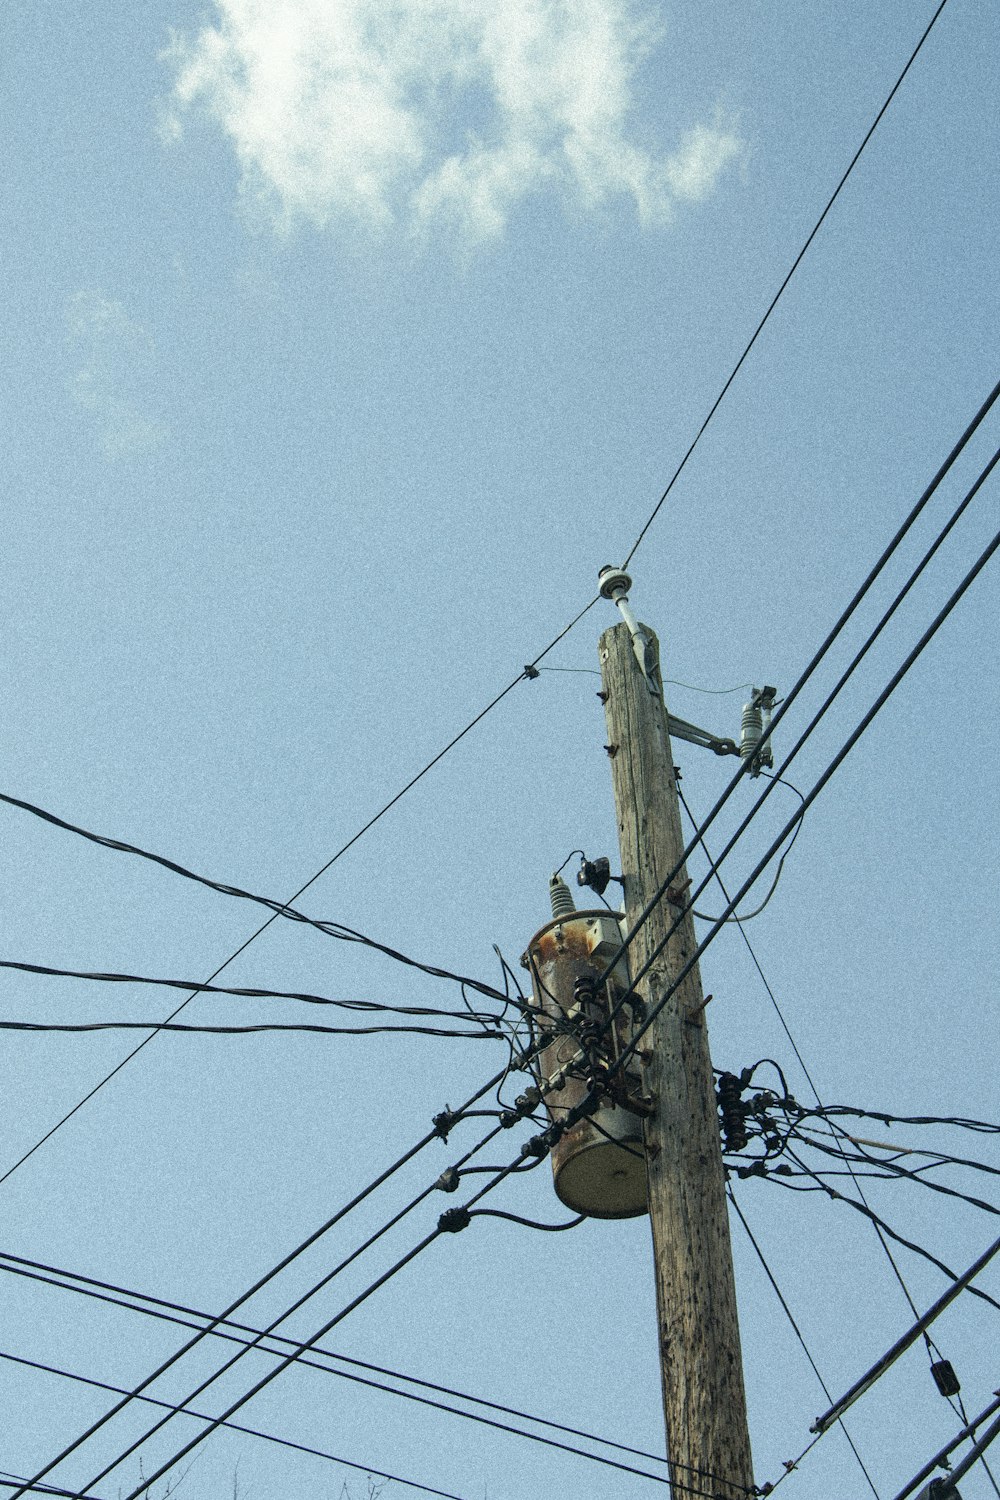 a telephone pole with many wires